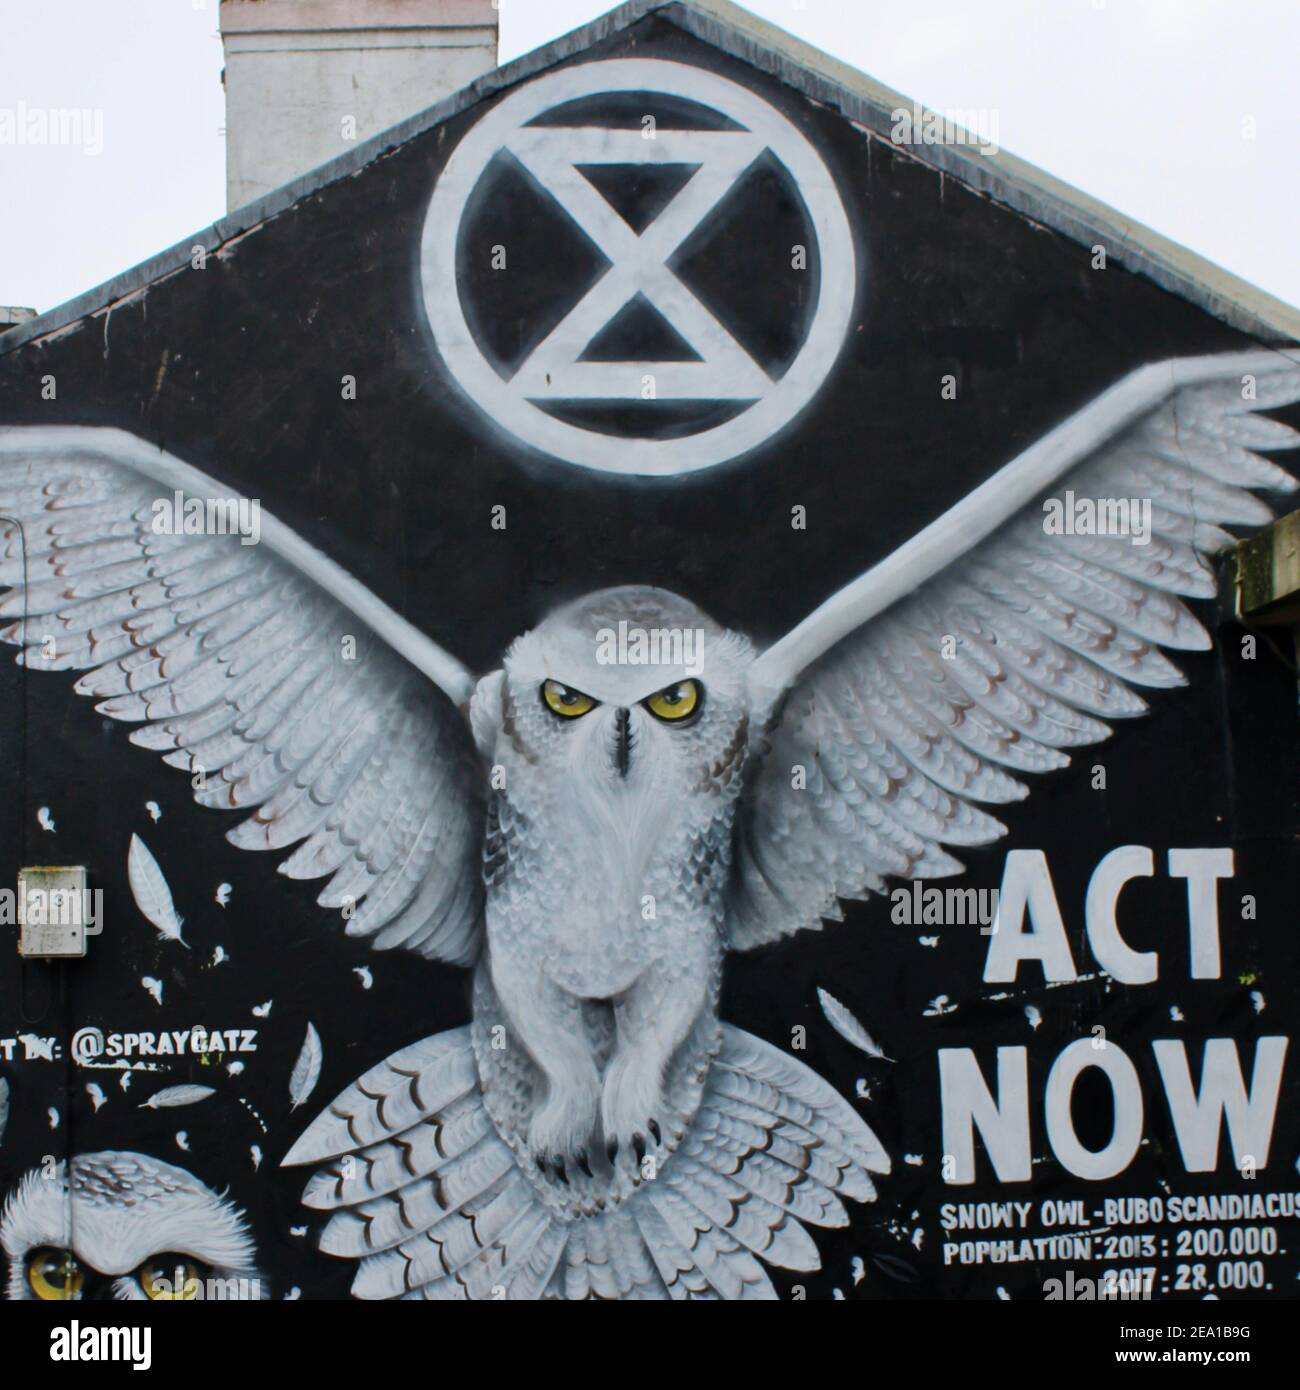 Brighton wall art advocating people to act now to protect the environment. Features a Snowy Owl and the extinction rebellion symbol. Stock Photo